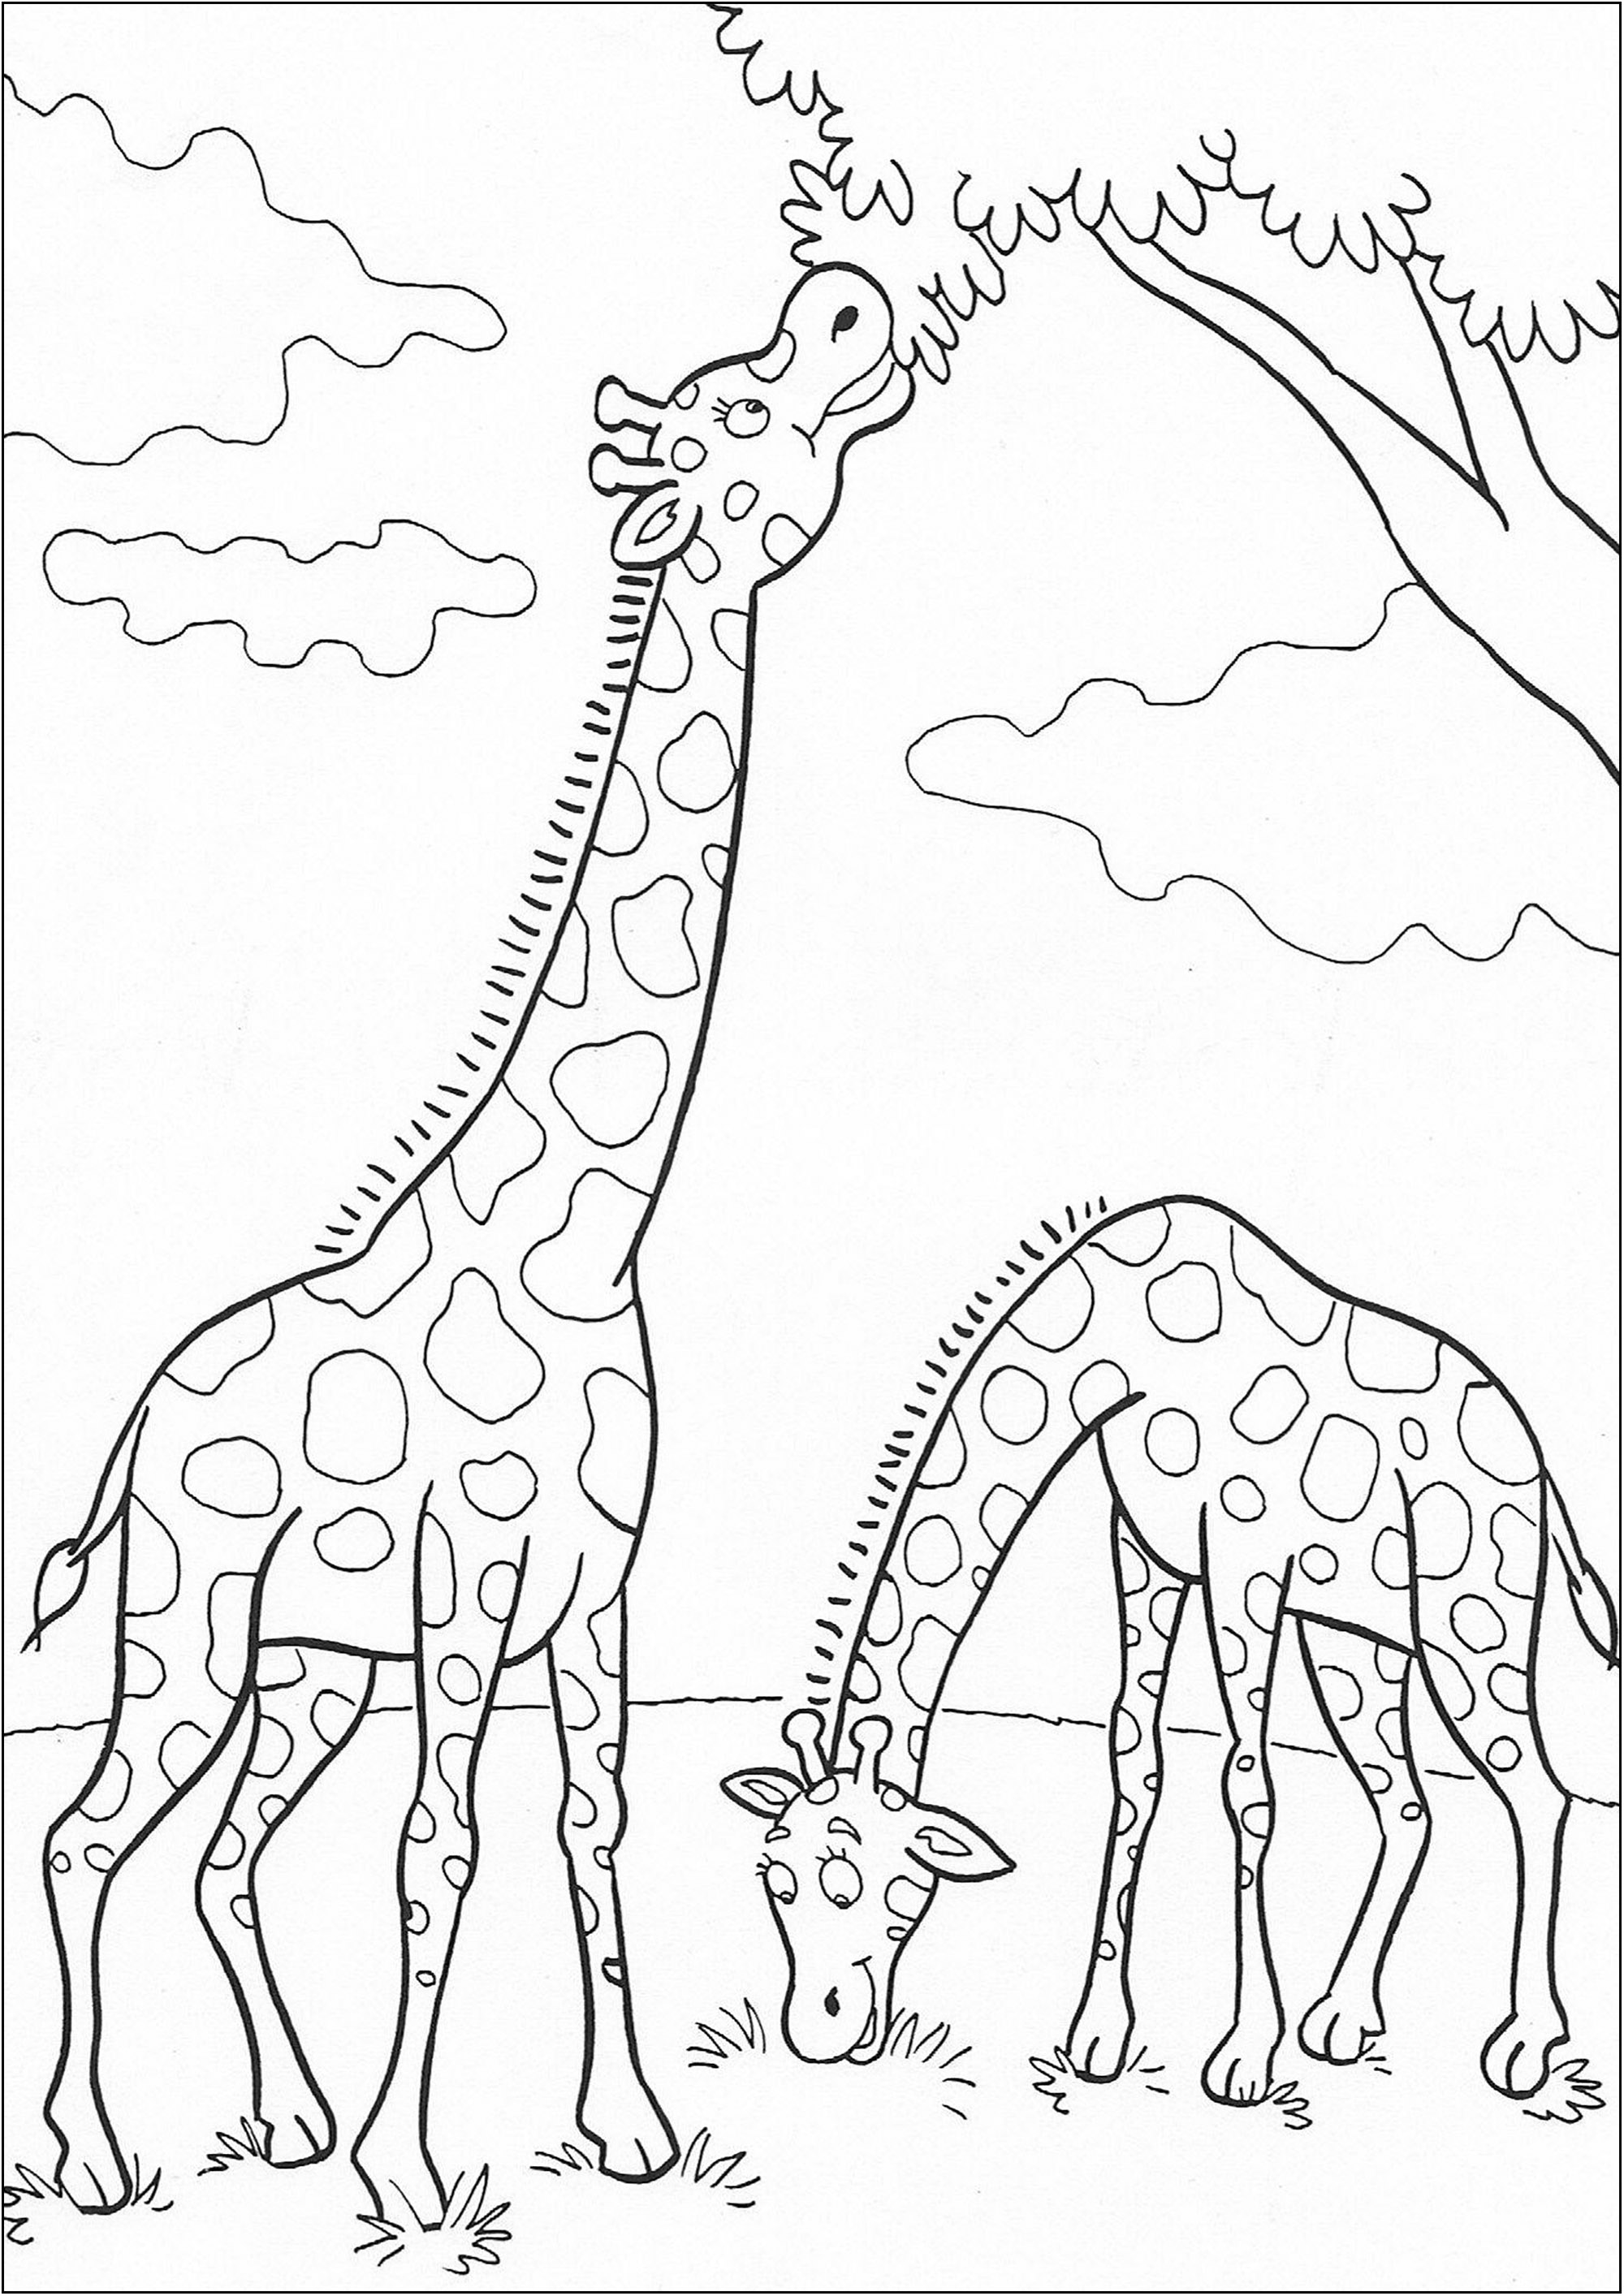 Two giraffes in the middle of a meal. A pretty, simple coloring page with nice details to color.